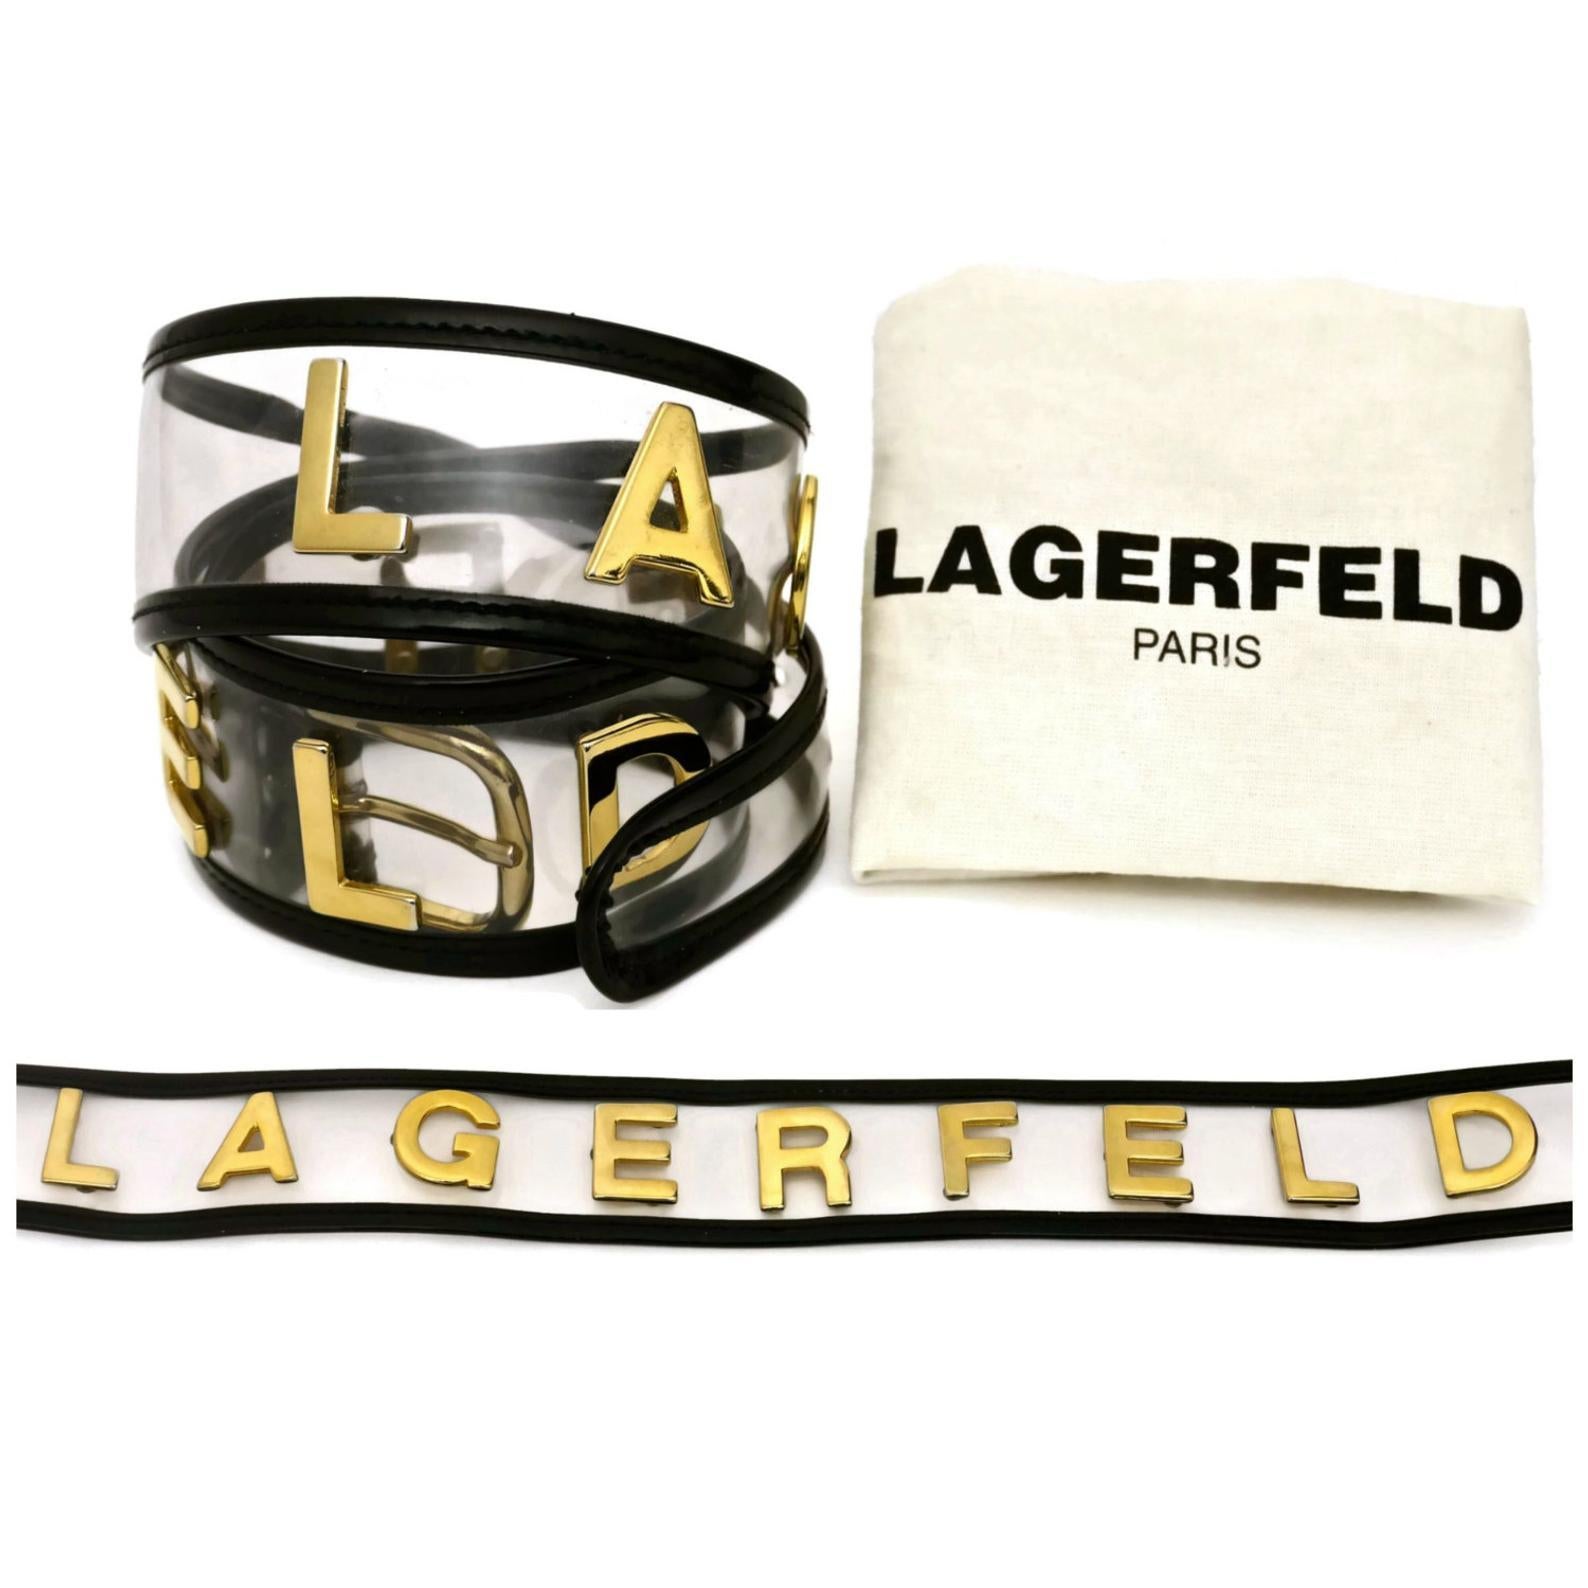 Vintage KARL LAGERFELD Transparent Gold Letter Belt

Measurements:
Height: 2 inches
Will fit waists: 29 4/8 inches to 32 inches

Features:
- 100% Authentic KARL LAGERFELD.
- Transparent vinyl and black patent leather trimming.
- Spelled LAGERFELD